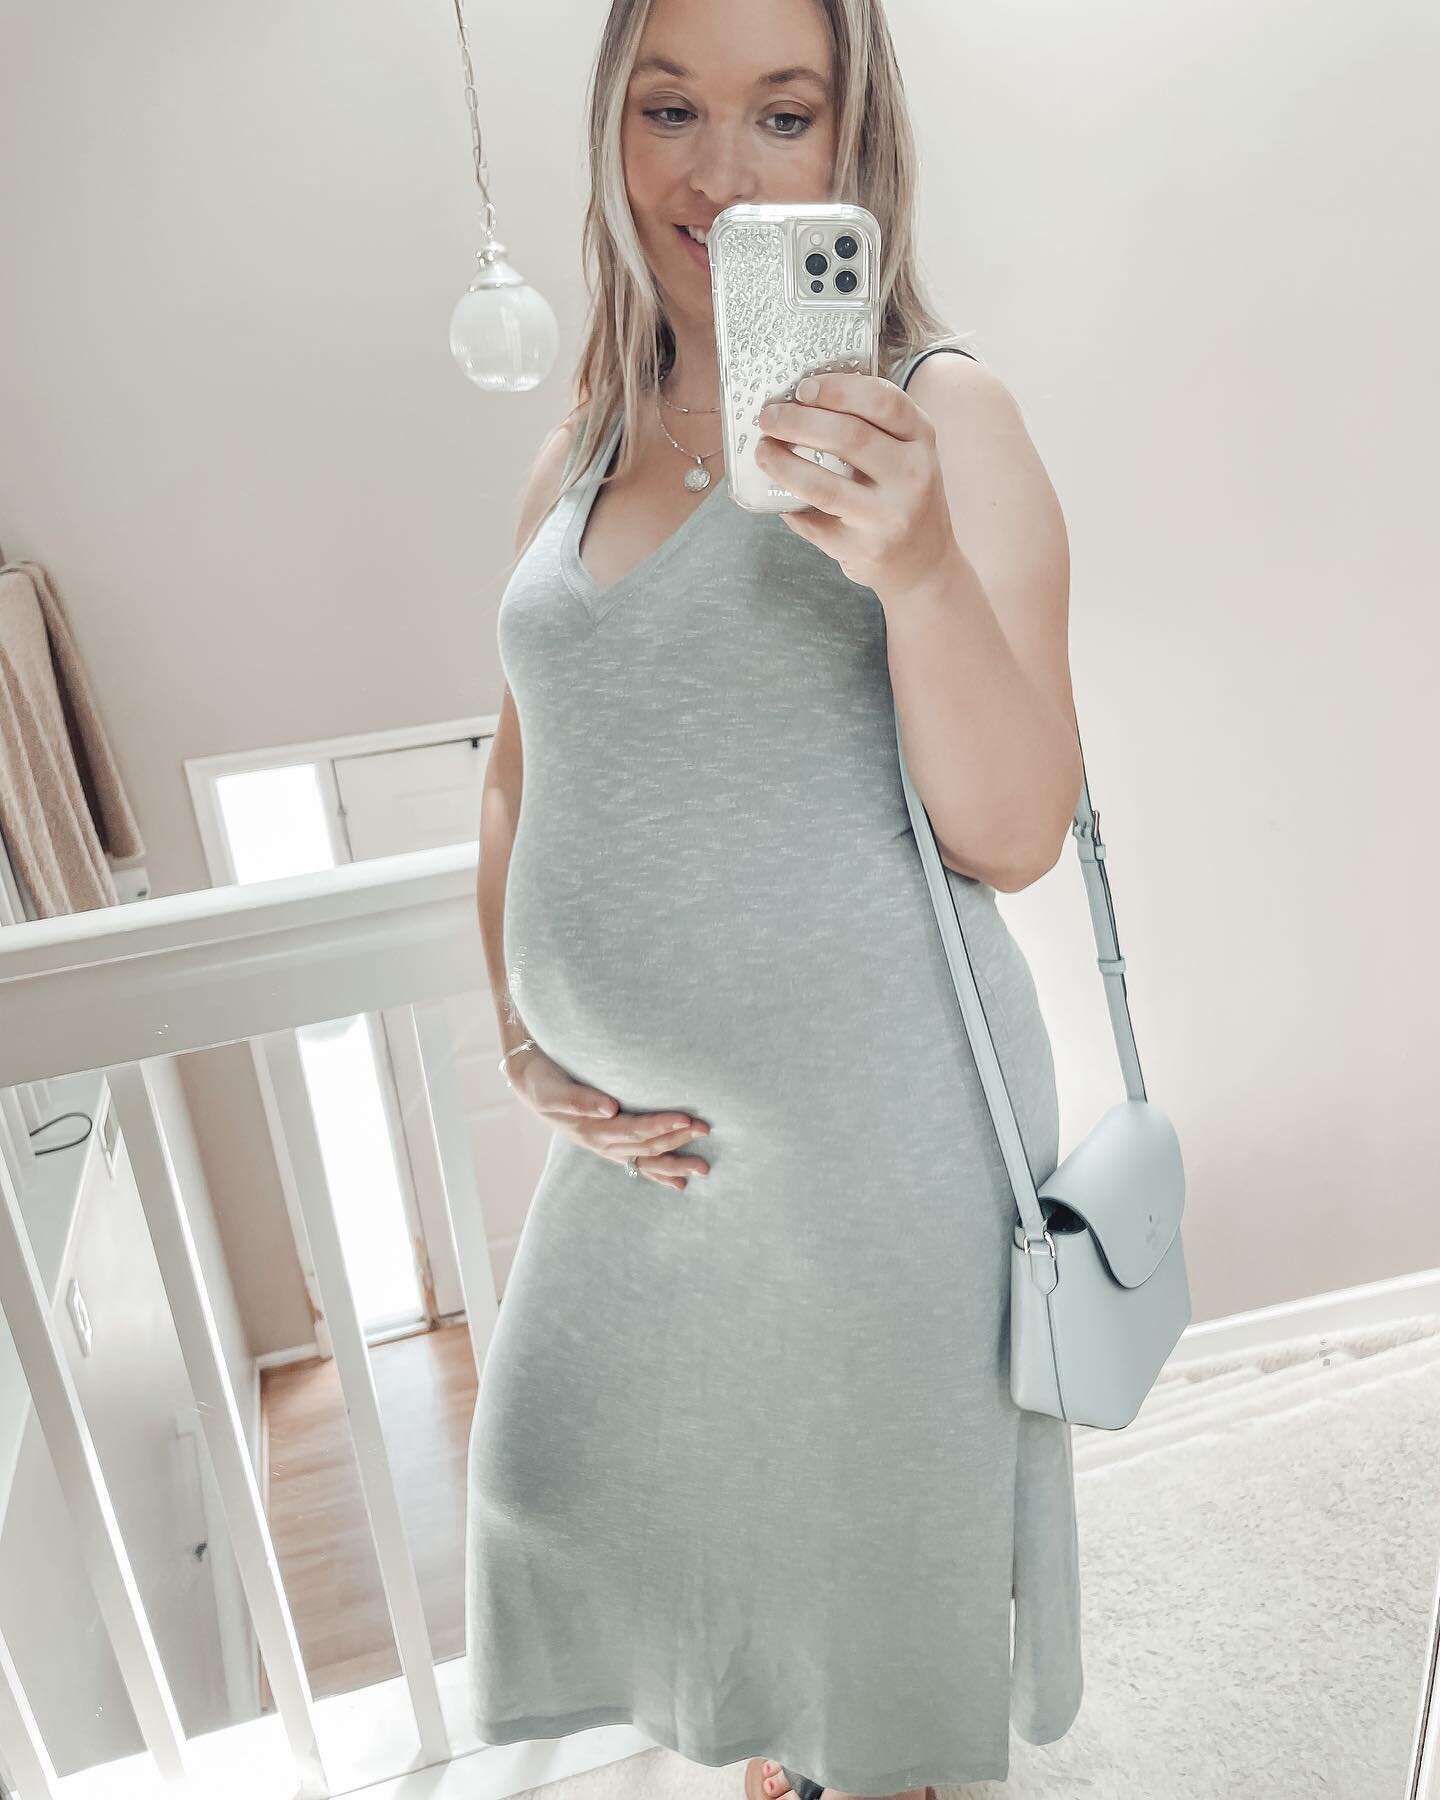 I&rsquo;ve been away soaking up all that this pregnancy has to offer, but I&rsquo;m BACK with tons of #maternity and #baby inspo to share and fresh ideas for after pregnancy! 

This dress is not maternity, but definitely works with my growing belly! 